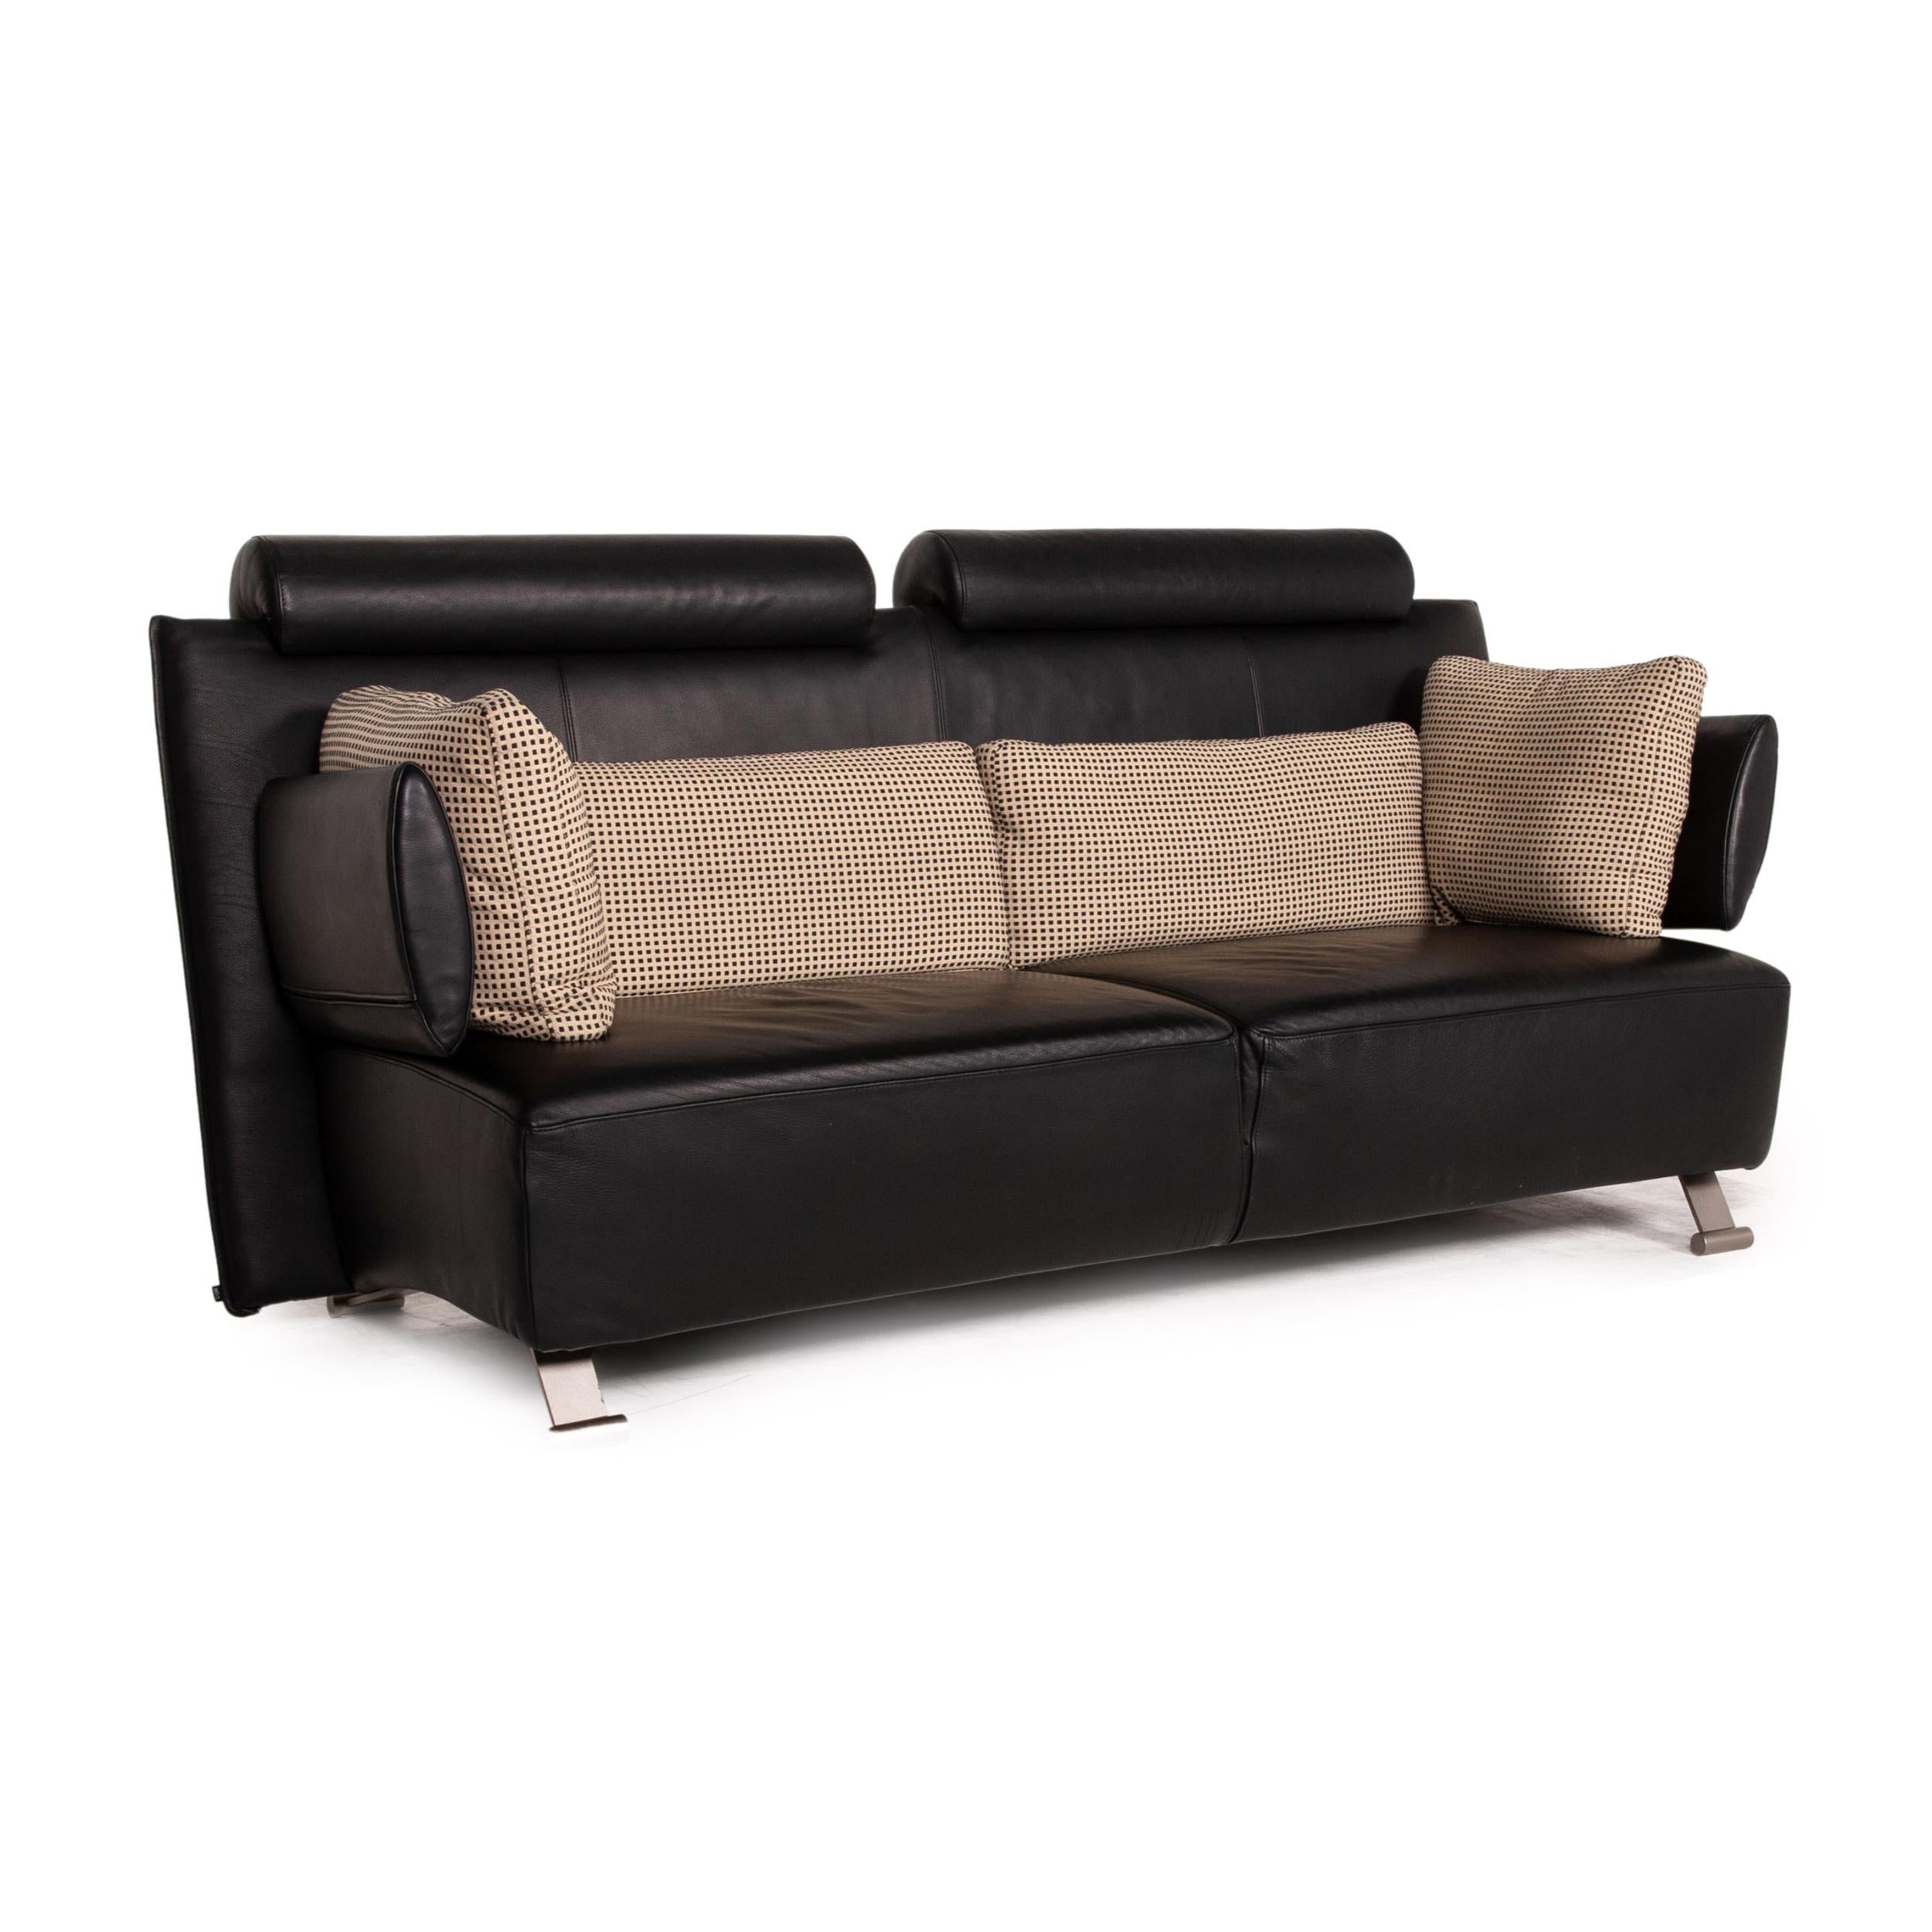 COR Sera Leather Sofa Black Two-Seater Function Couch For Sale 1